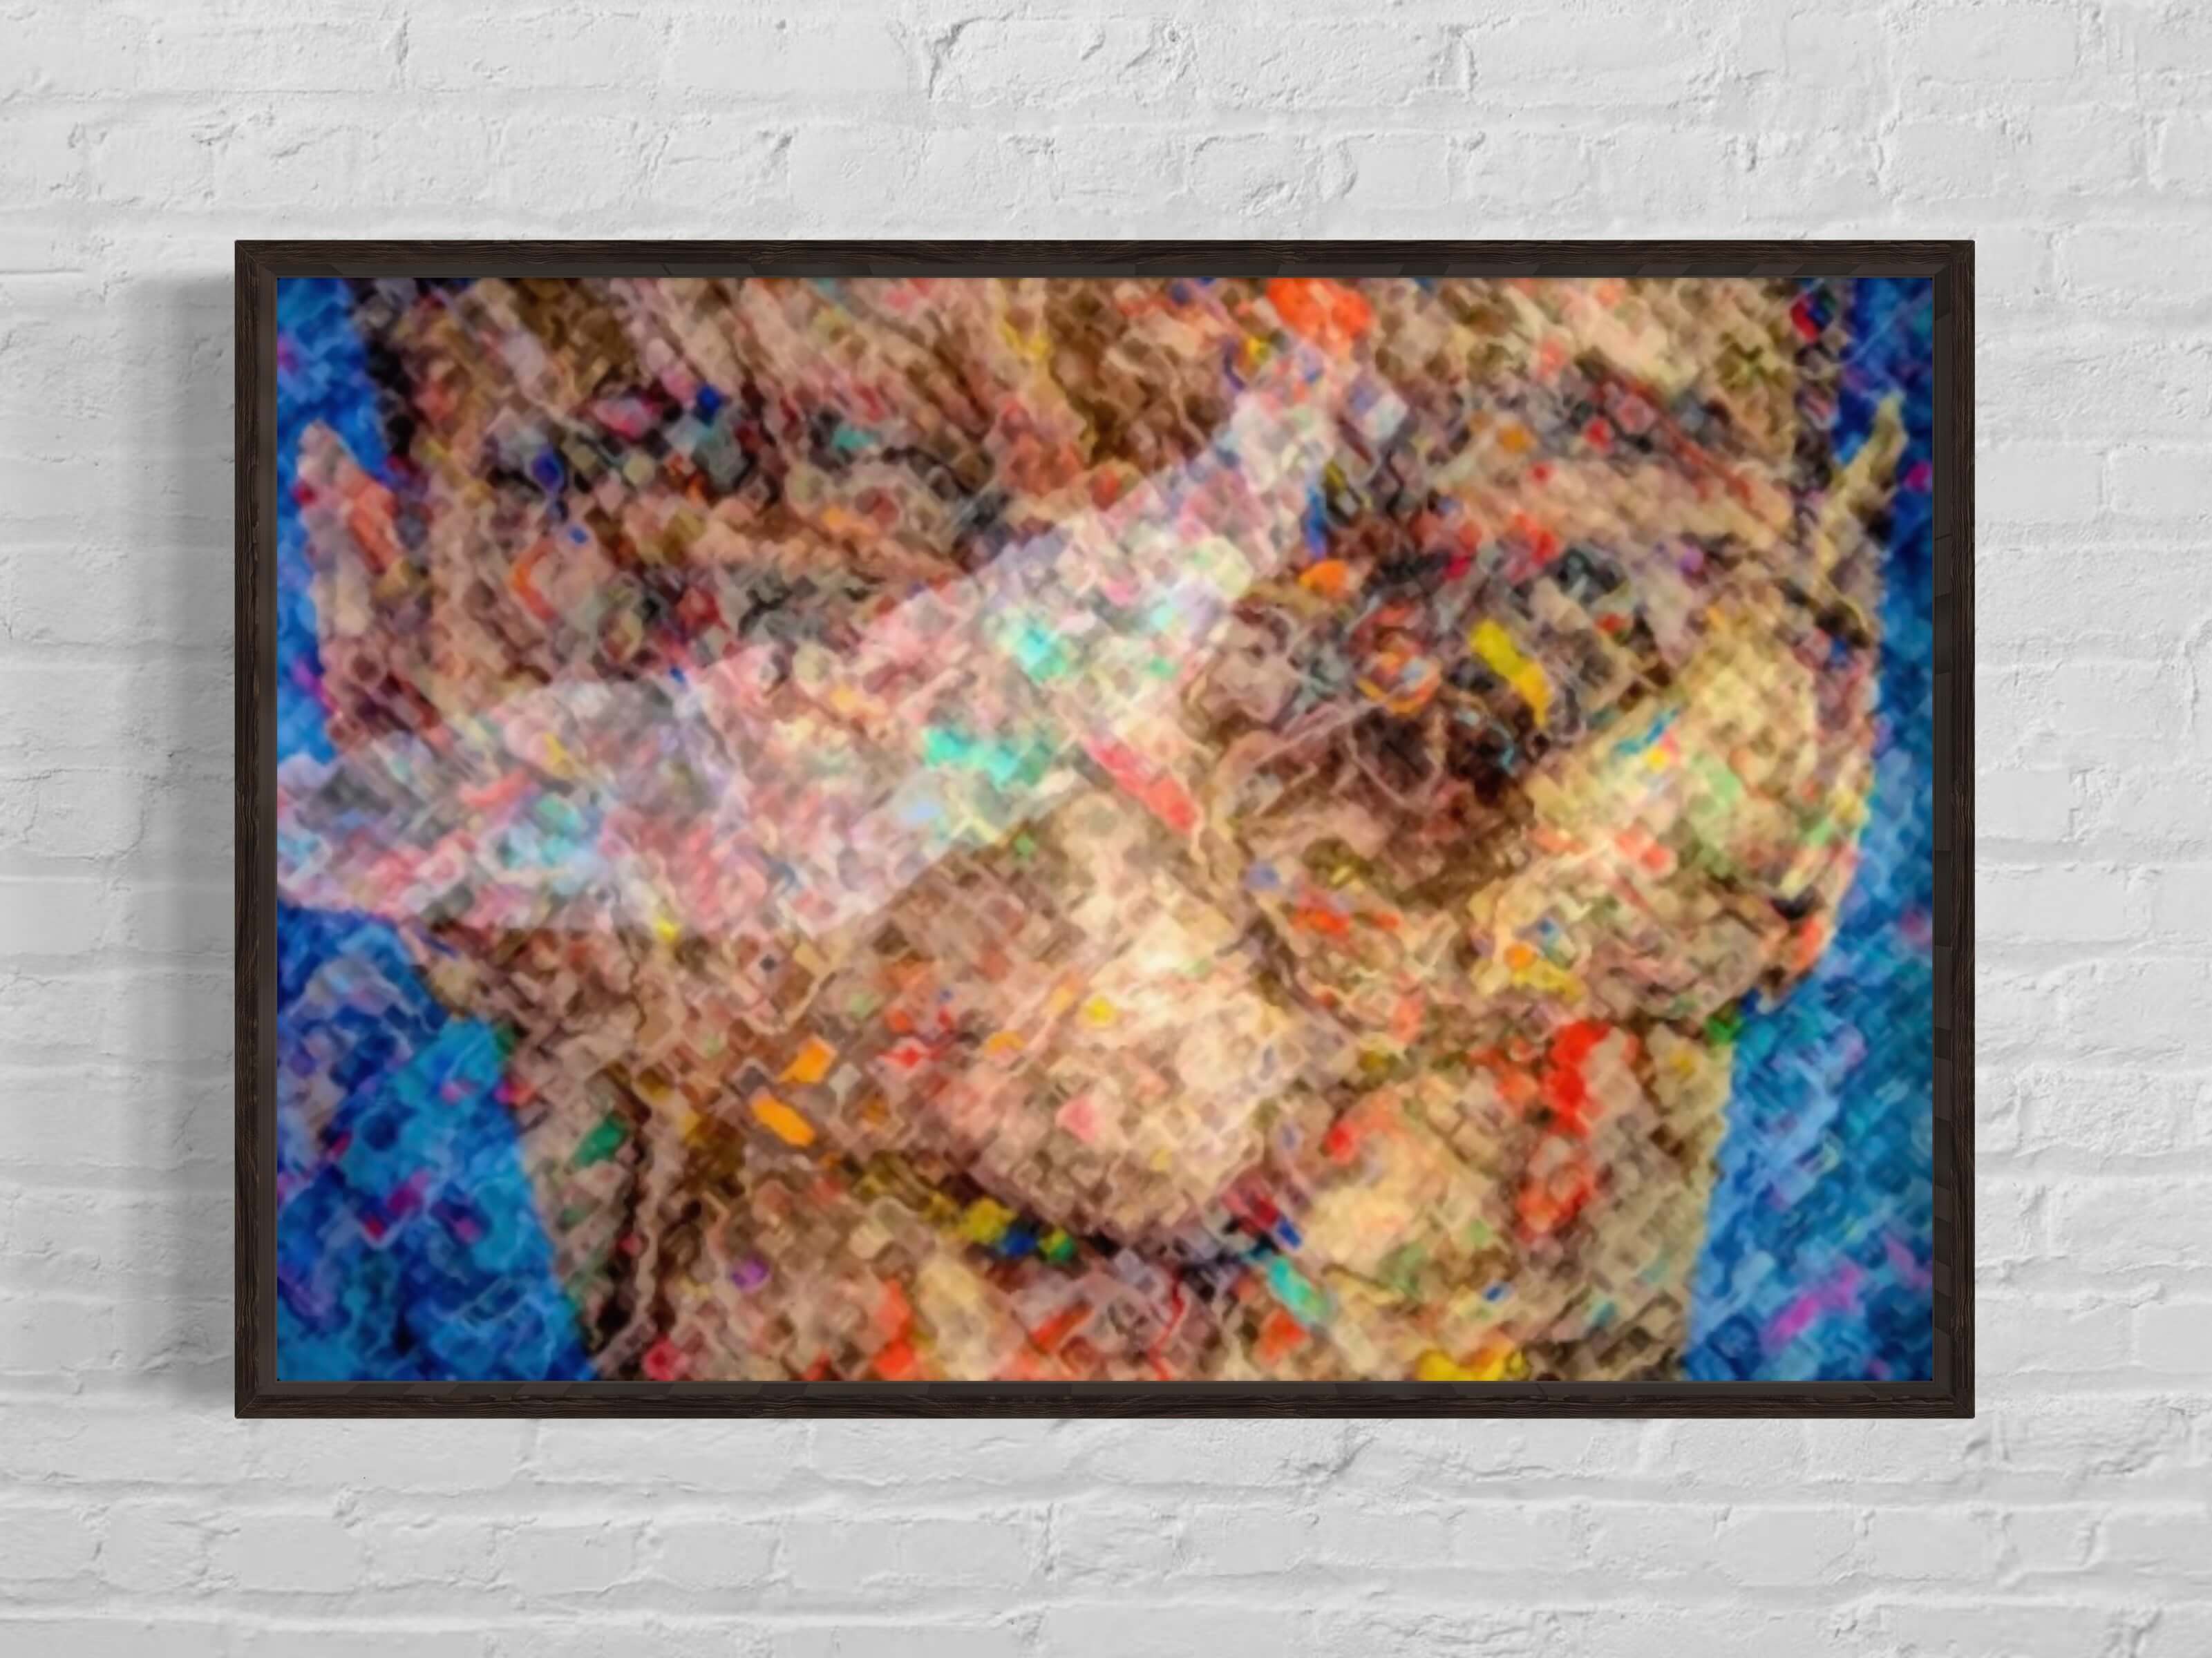 Swathe of Confusion' is an intriguing artwork that captures the struggle with societal boundaries. The canvas portrays an obstructed face with eyes down, evoking a sense of concealed emotions and inner turmoil.